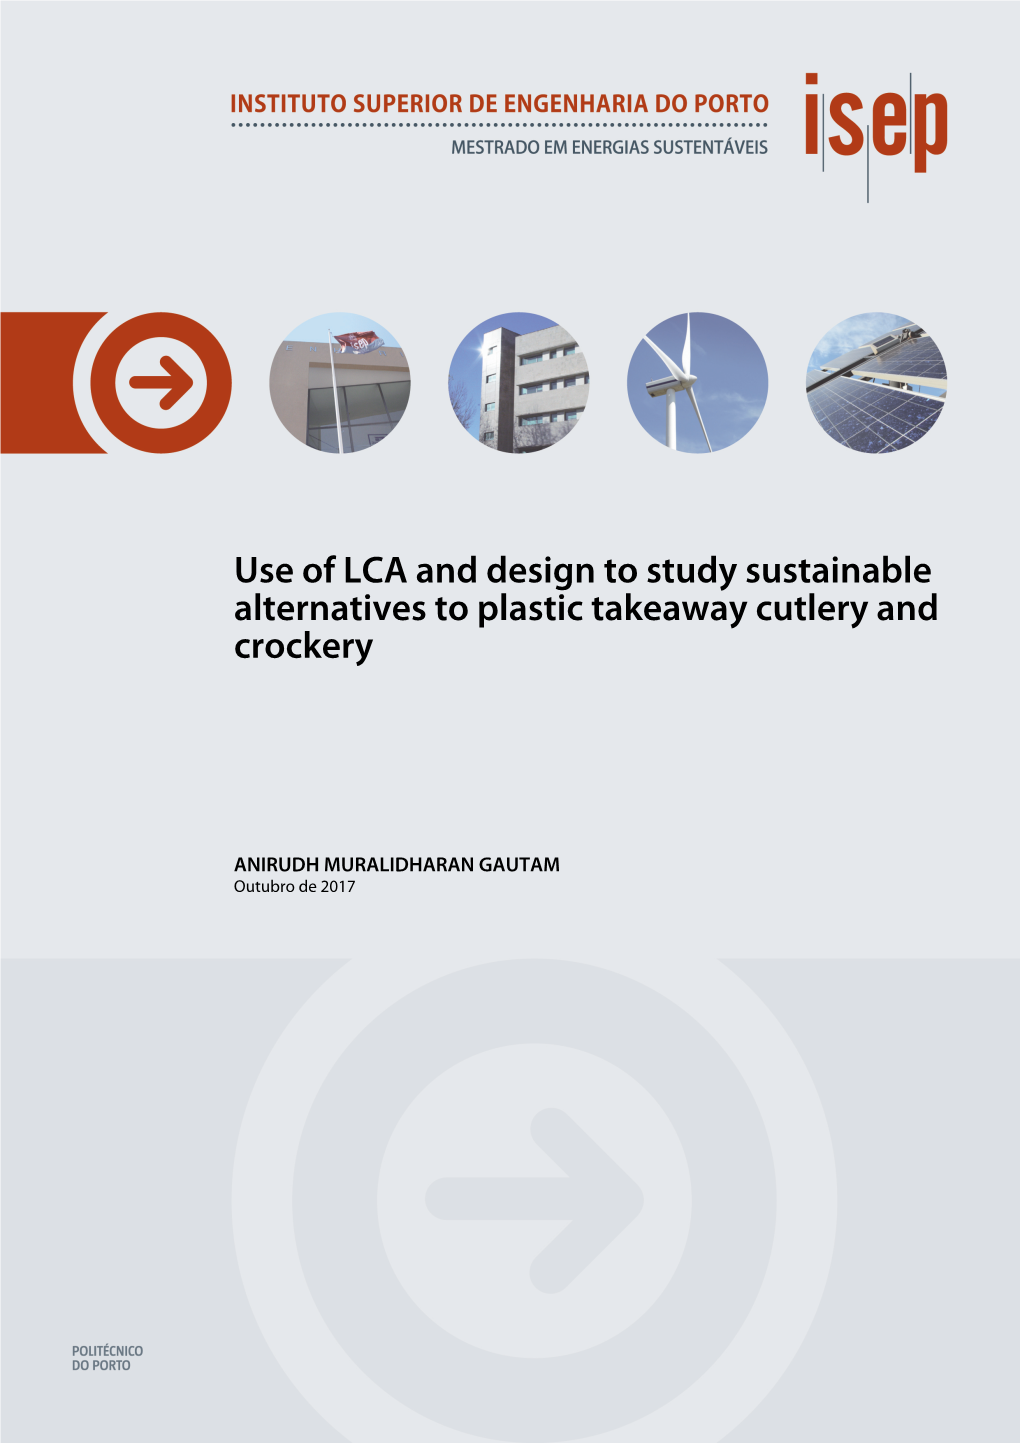 Use of LCA and Design to Study Sustainable Alternatives to Plastic Takeaway Cutlery and Crockery